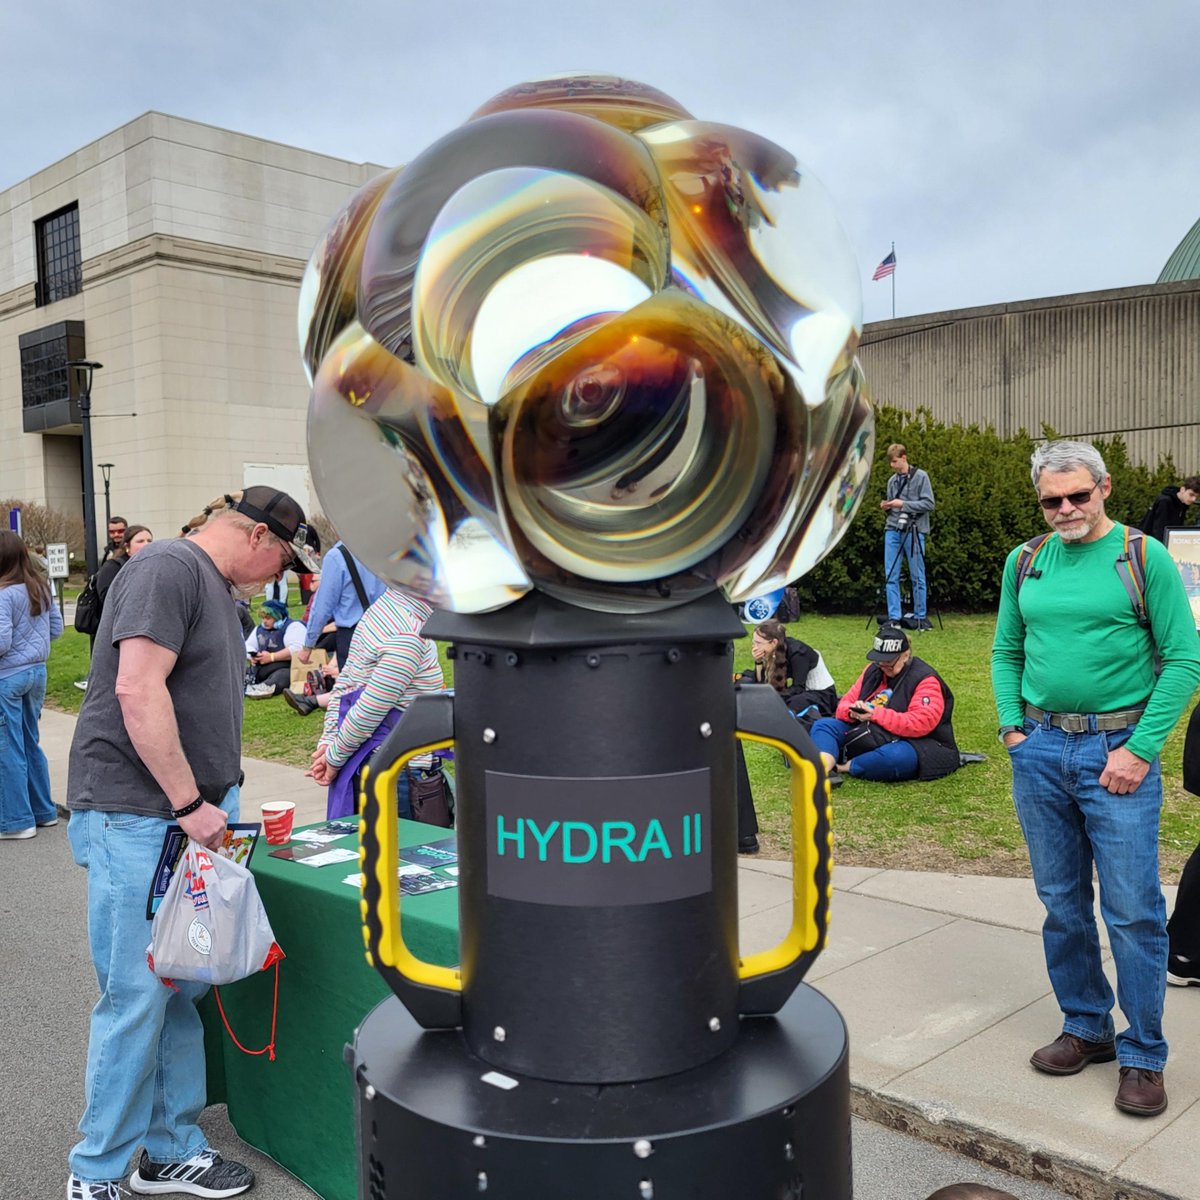 The #GreaterROC community got to see Hydra II for the first time at the @rocRMSC. It was great seeing so many families, students, and community leaders circleoptics.com/hydra-ii/